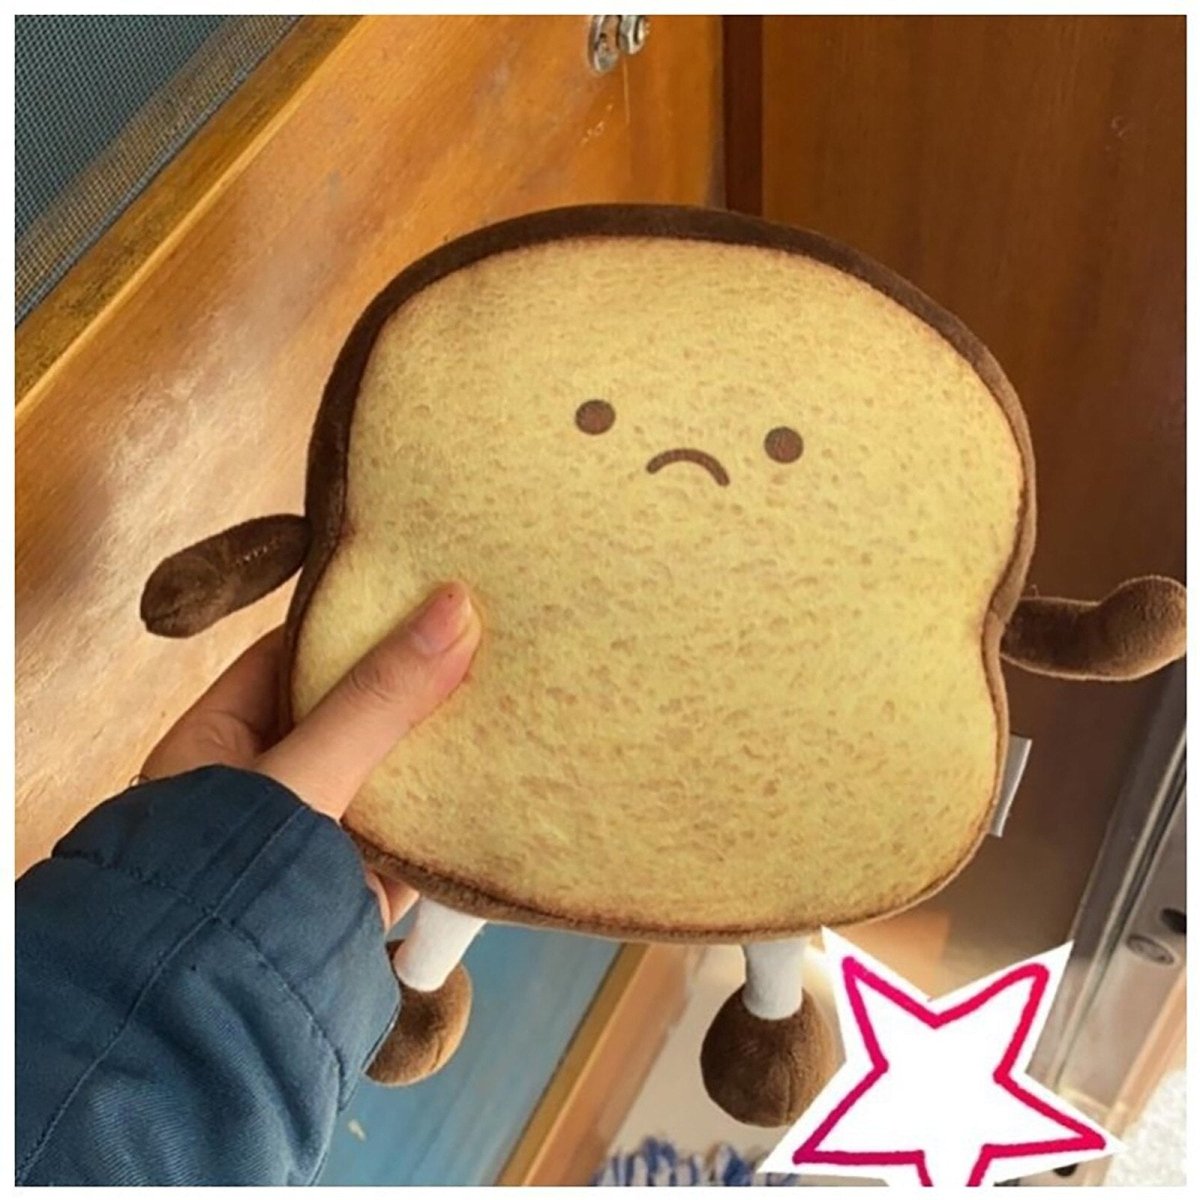 Smiling Toast Slice Plush Pillow, Soft and Comfortable - Soft Plush Toys - Scribble Snacks